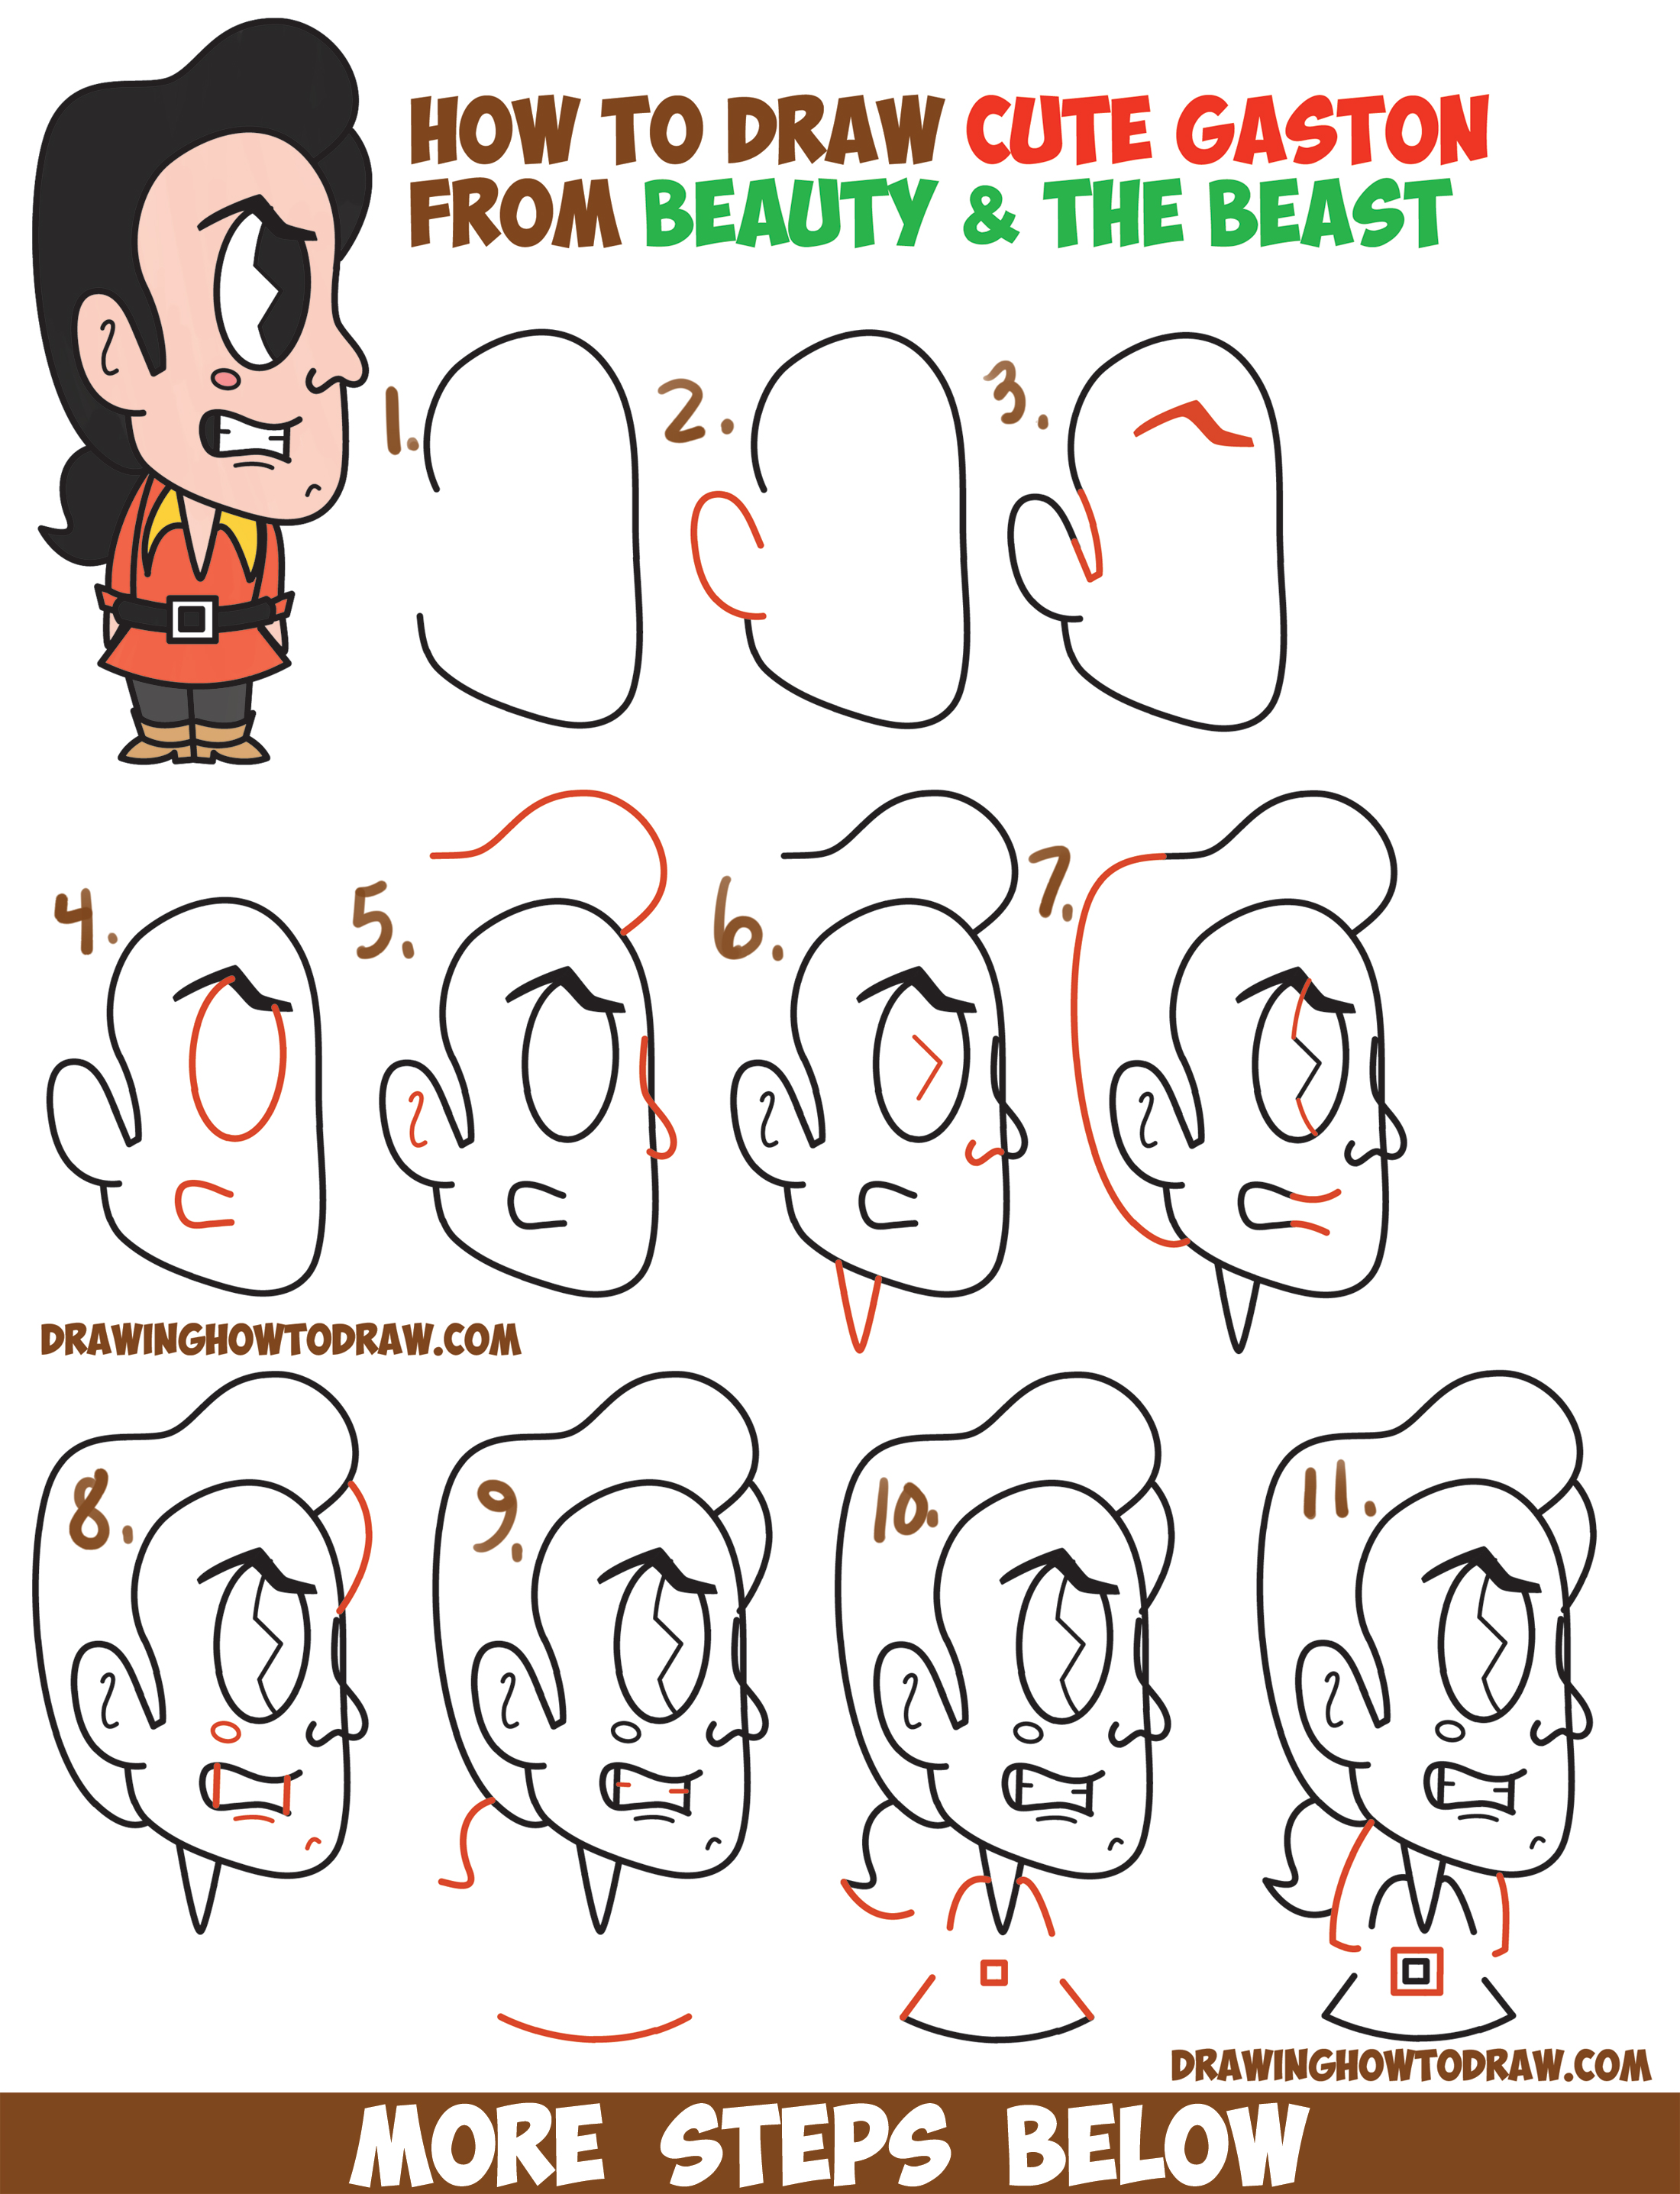 How to Draw Gaston from Disney's Beauty and the Beast (Cute / Kawaii / Chibi) Easy Step by Step Drawing Tutorial for Kids and Beginners